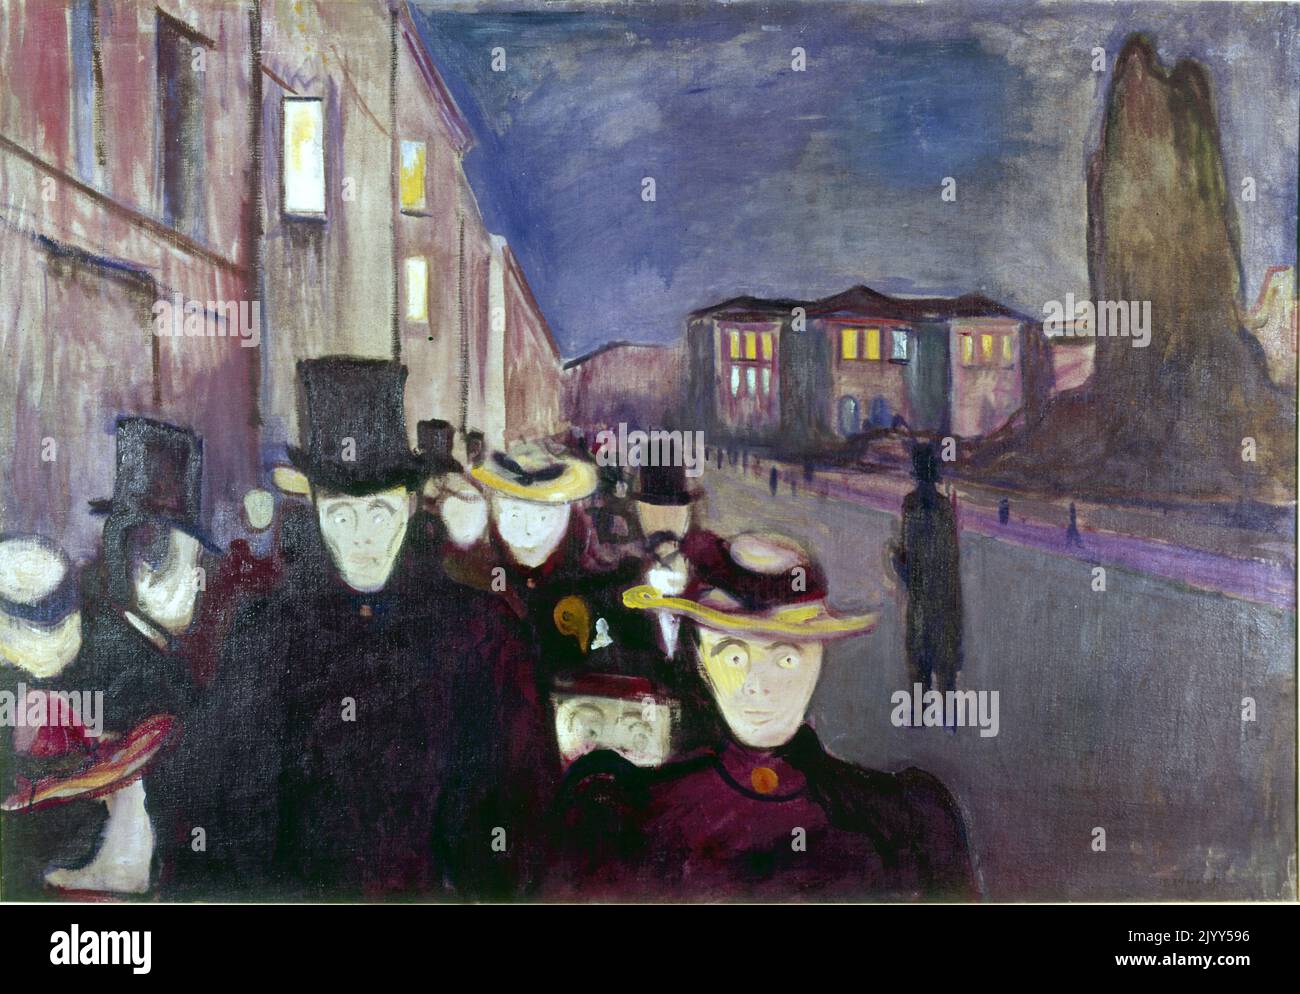 Edvard Munch 'Evening on Karl Johan Street' 1892. Oil on canvas; 1892. Edvard Munch (1863 - 1944); Norwegian painter and printmaker whose intensely evocative treatment of psychological themes built upon some of the main tenets of late 19th-century Symbolism and greatly influenced German Expressionism in the early 20th century. Stock Photo